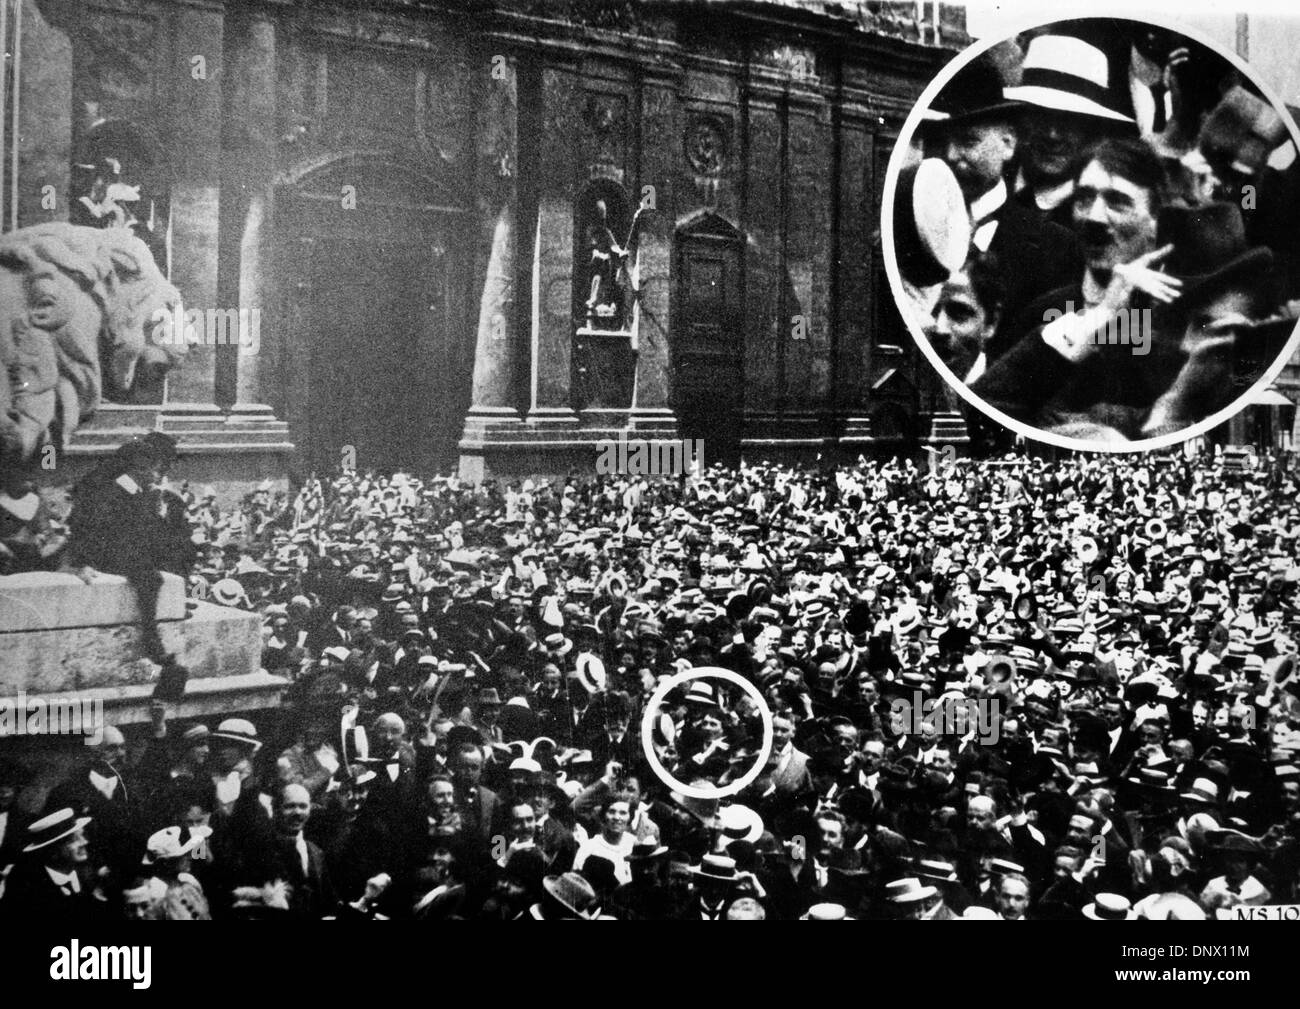 Aug. 1, 1914 - Munich, Germany - Nazi leader ADOLF HITLER in the middle of the crowd in Munich at the outbreak of the World War I in 1914. Photo taken by Max Hoffman, later to become Hitler's official photographer. (Credit Image: © KEYSTONE Pictures/ZUMAPRESS.com) Stock Photo